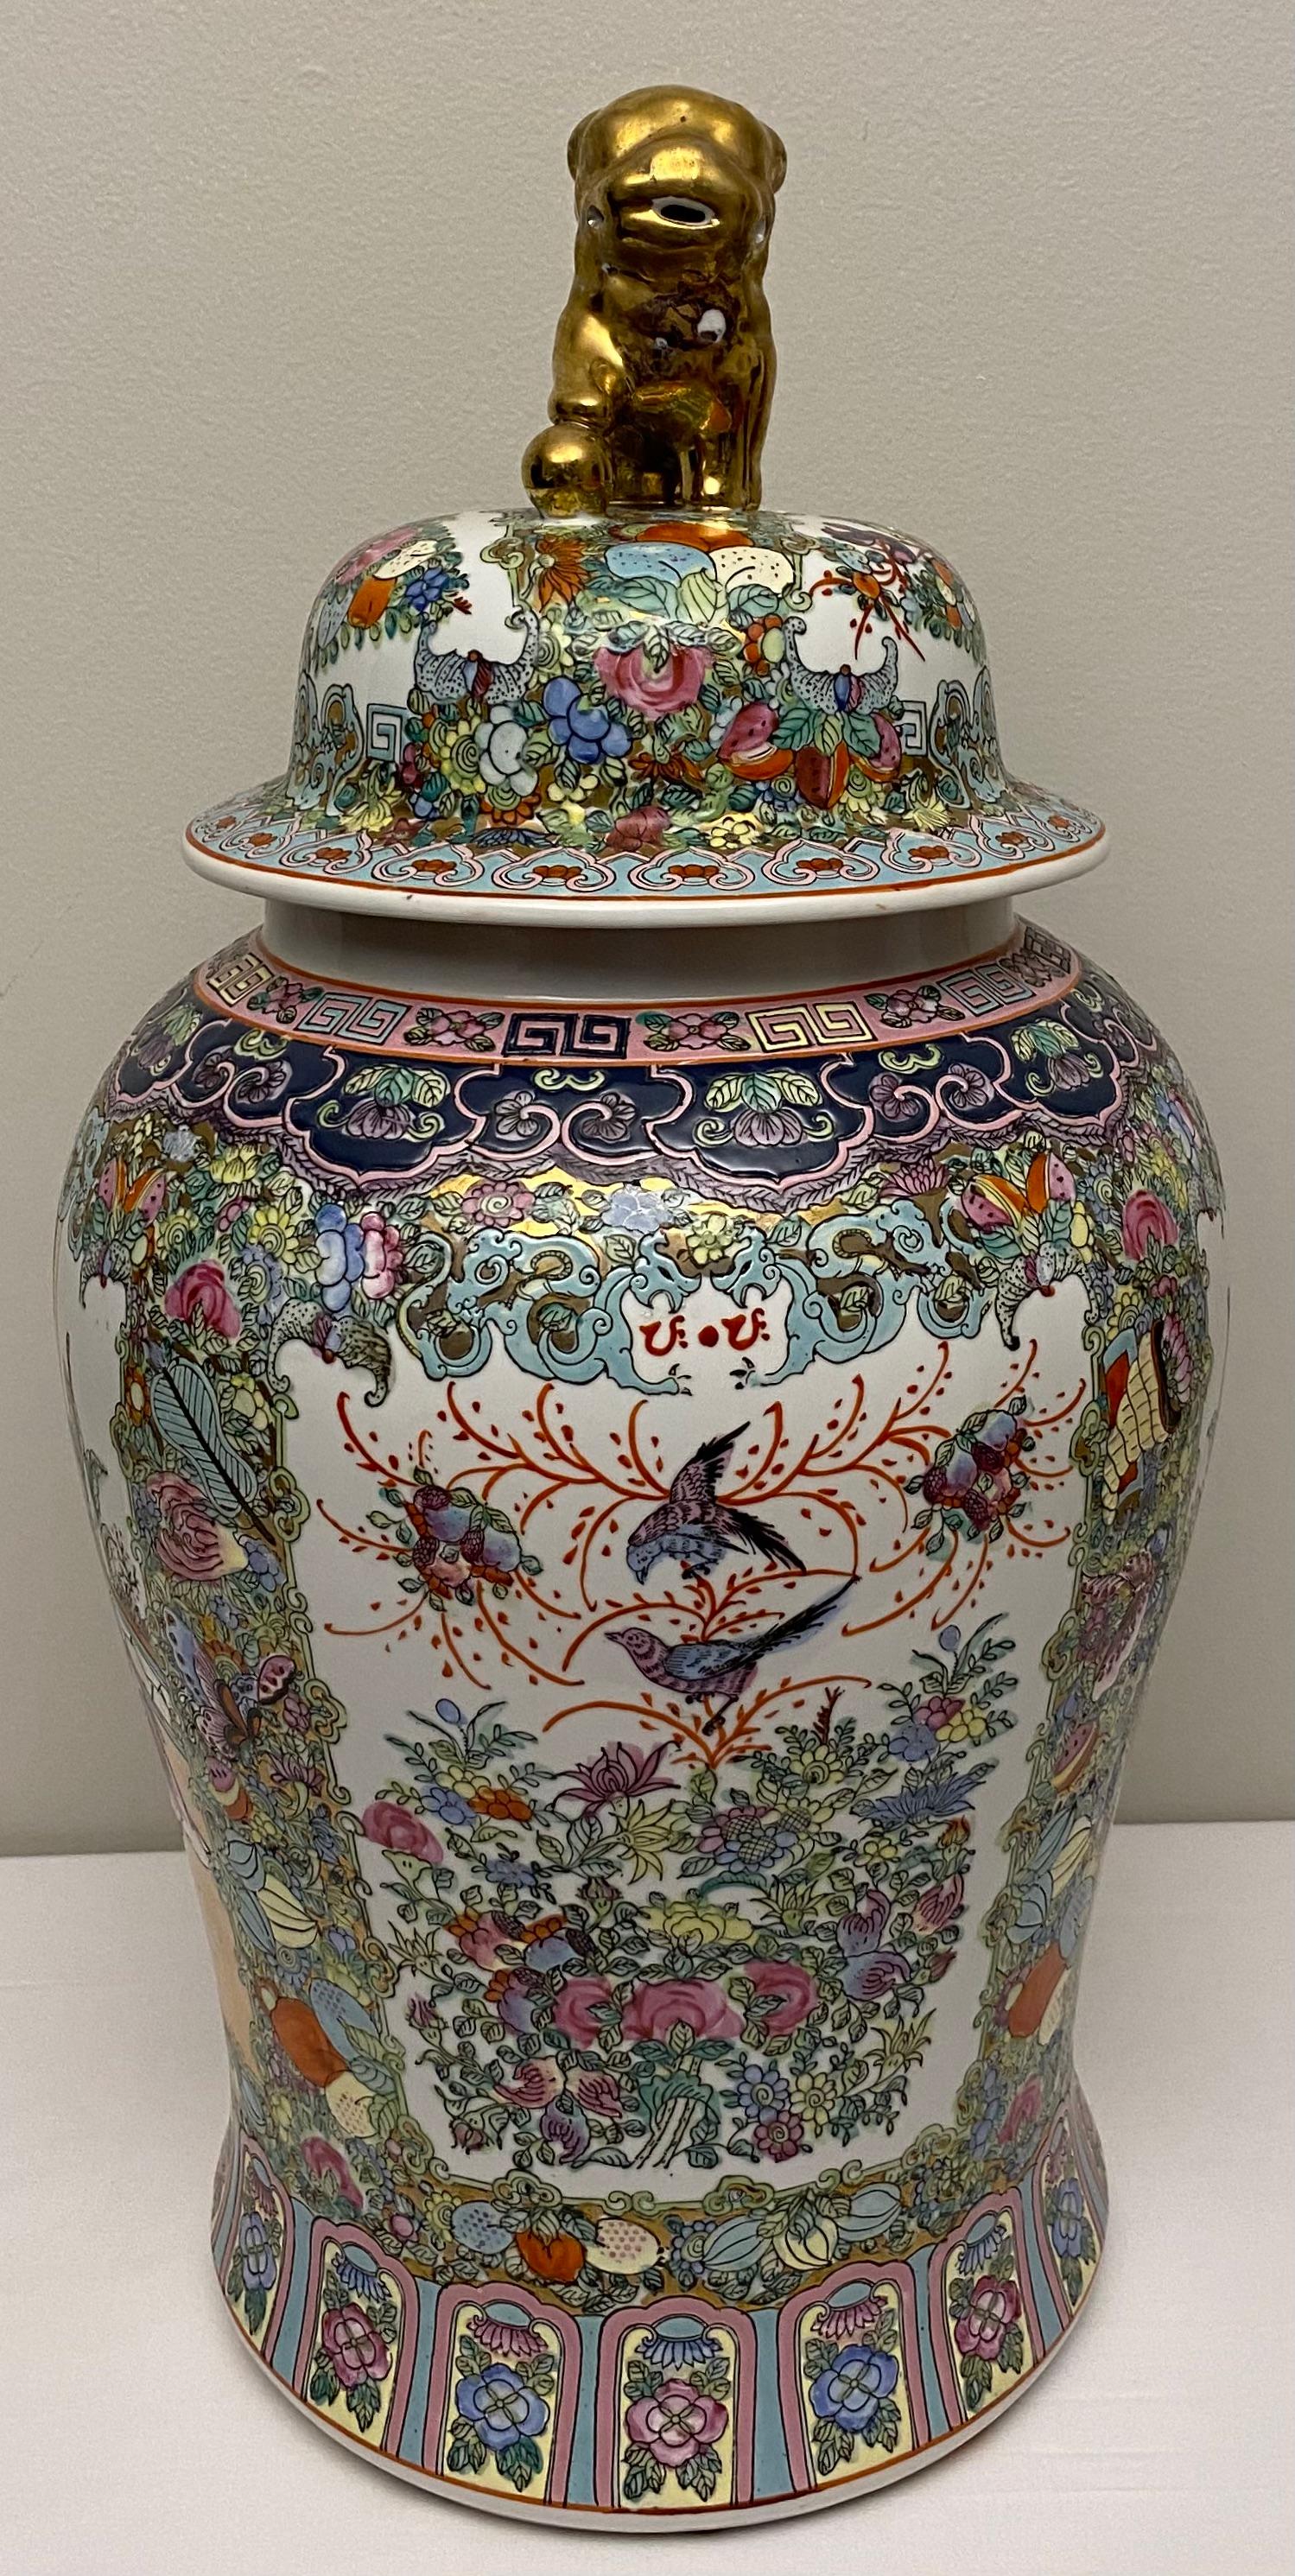 A beautiful, hand-painted Chinese famille rose temple jar decorated with foliage design and floral panels, gold lion dog form the knop of the lid. 

Similar to many fine porcelain temple jars that were manufactured by Samson and Company who were